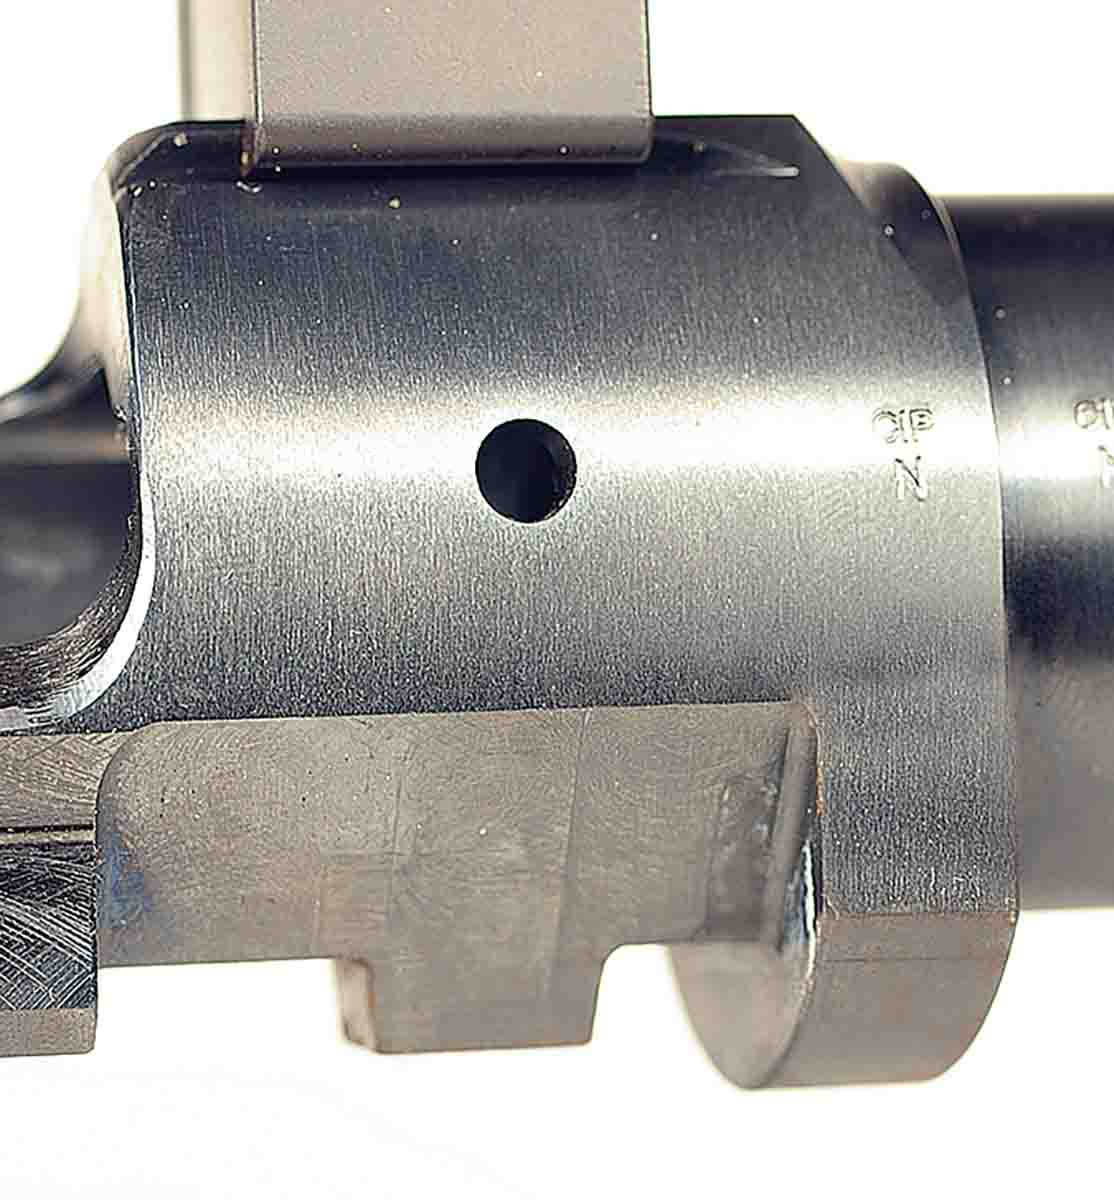 The CZ 557’s recoil lug is integral with the bottom of the receiver ring. A bedding lug is threaded to take the front receiver screw.